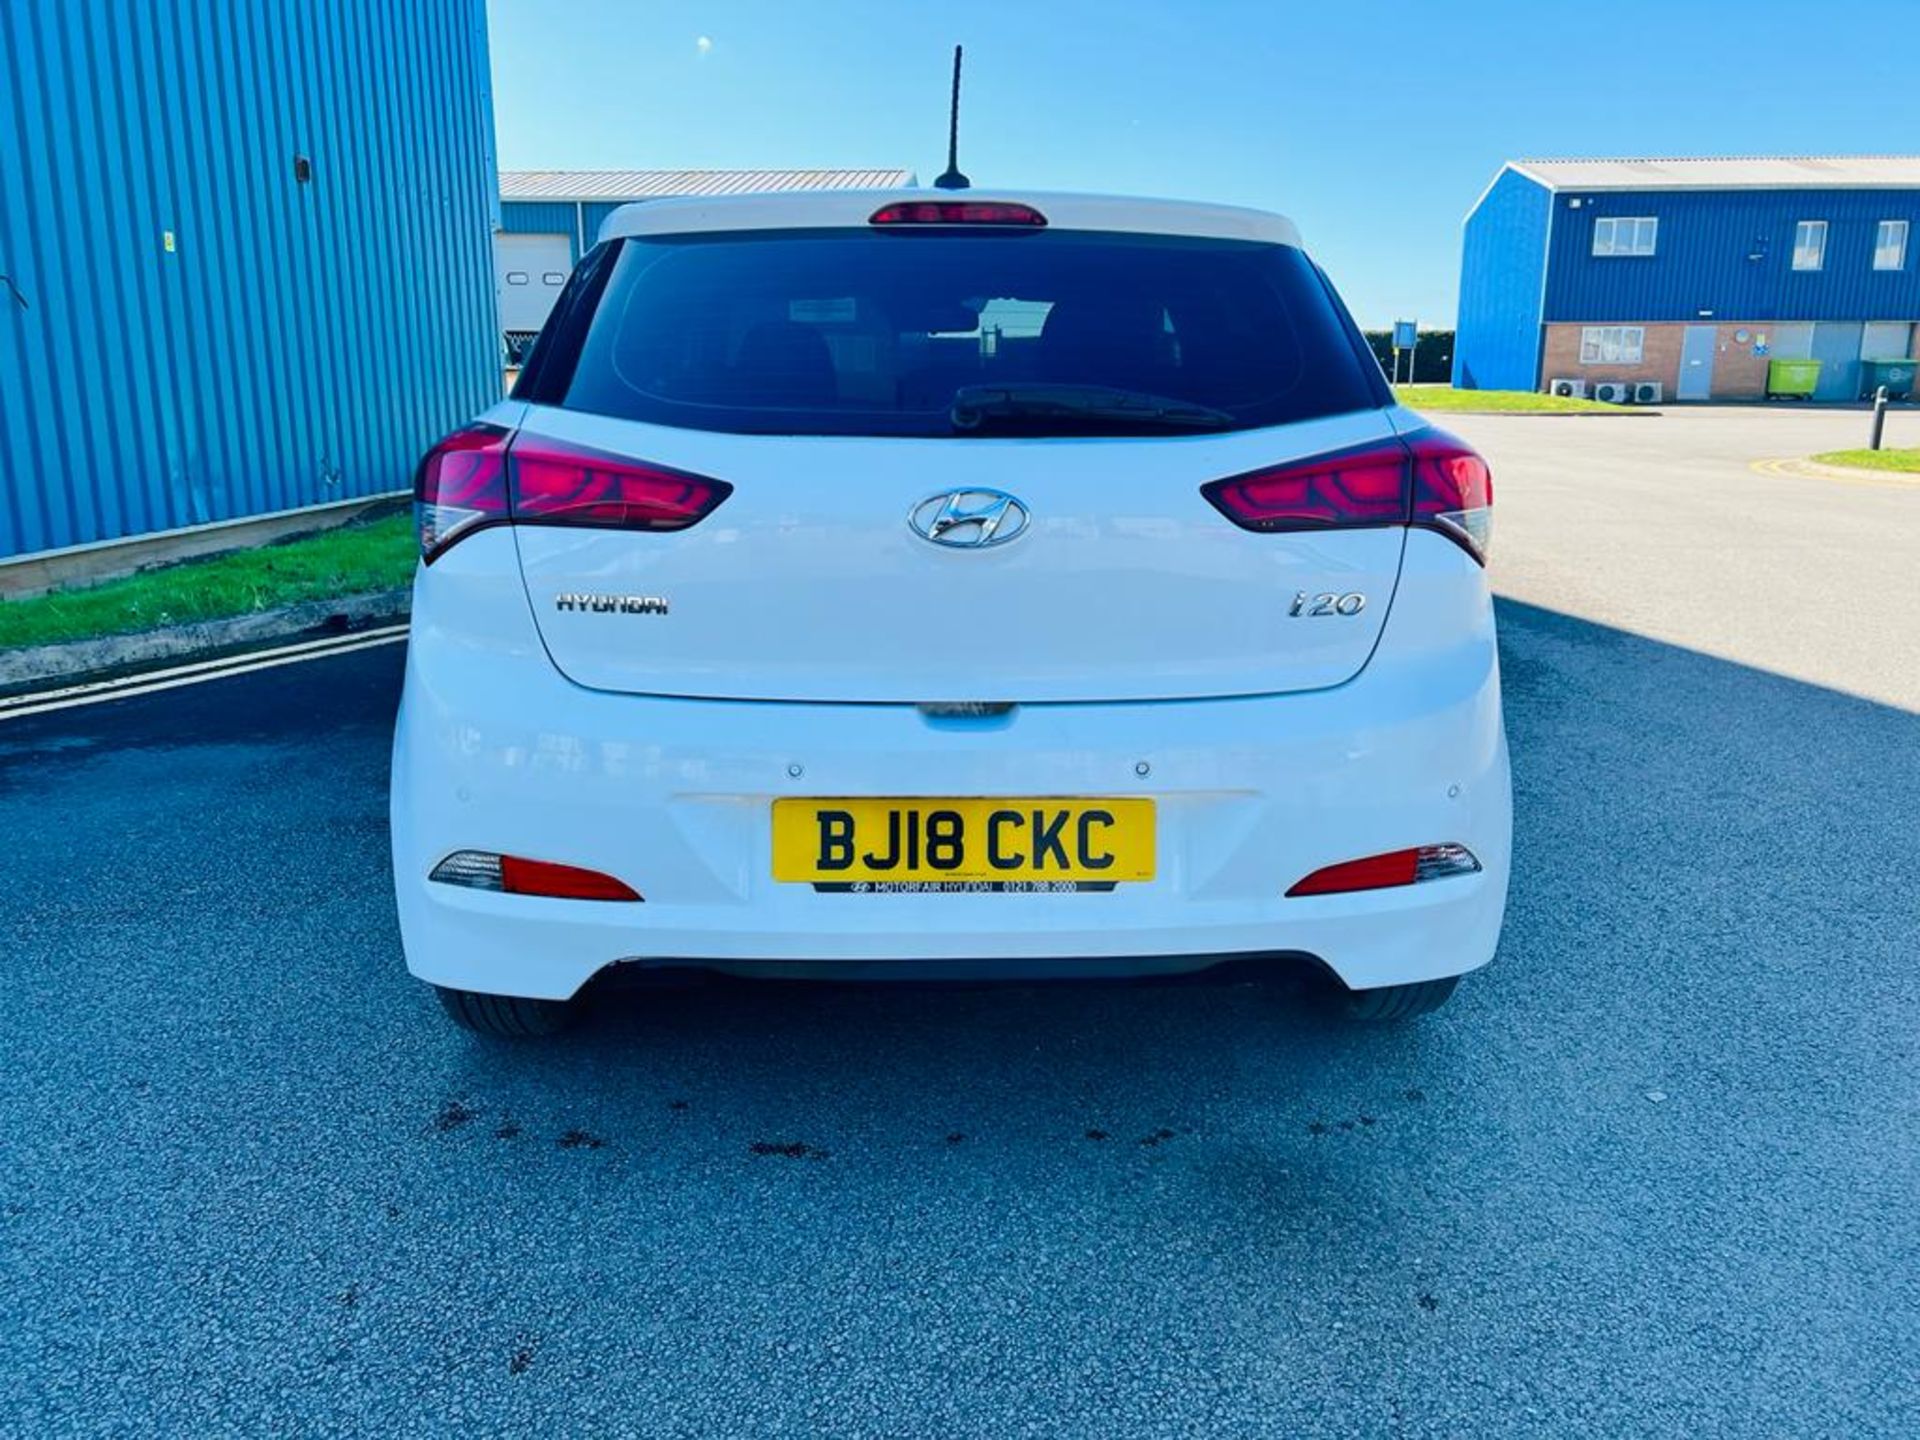 (RESERVE MET)Hyundai i20 1.4 CRDI 90 Special Equipped 2018 18 Reg - Euro 6 ULEZ Compliant - AIr Con - Image 6 of 20